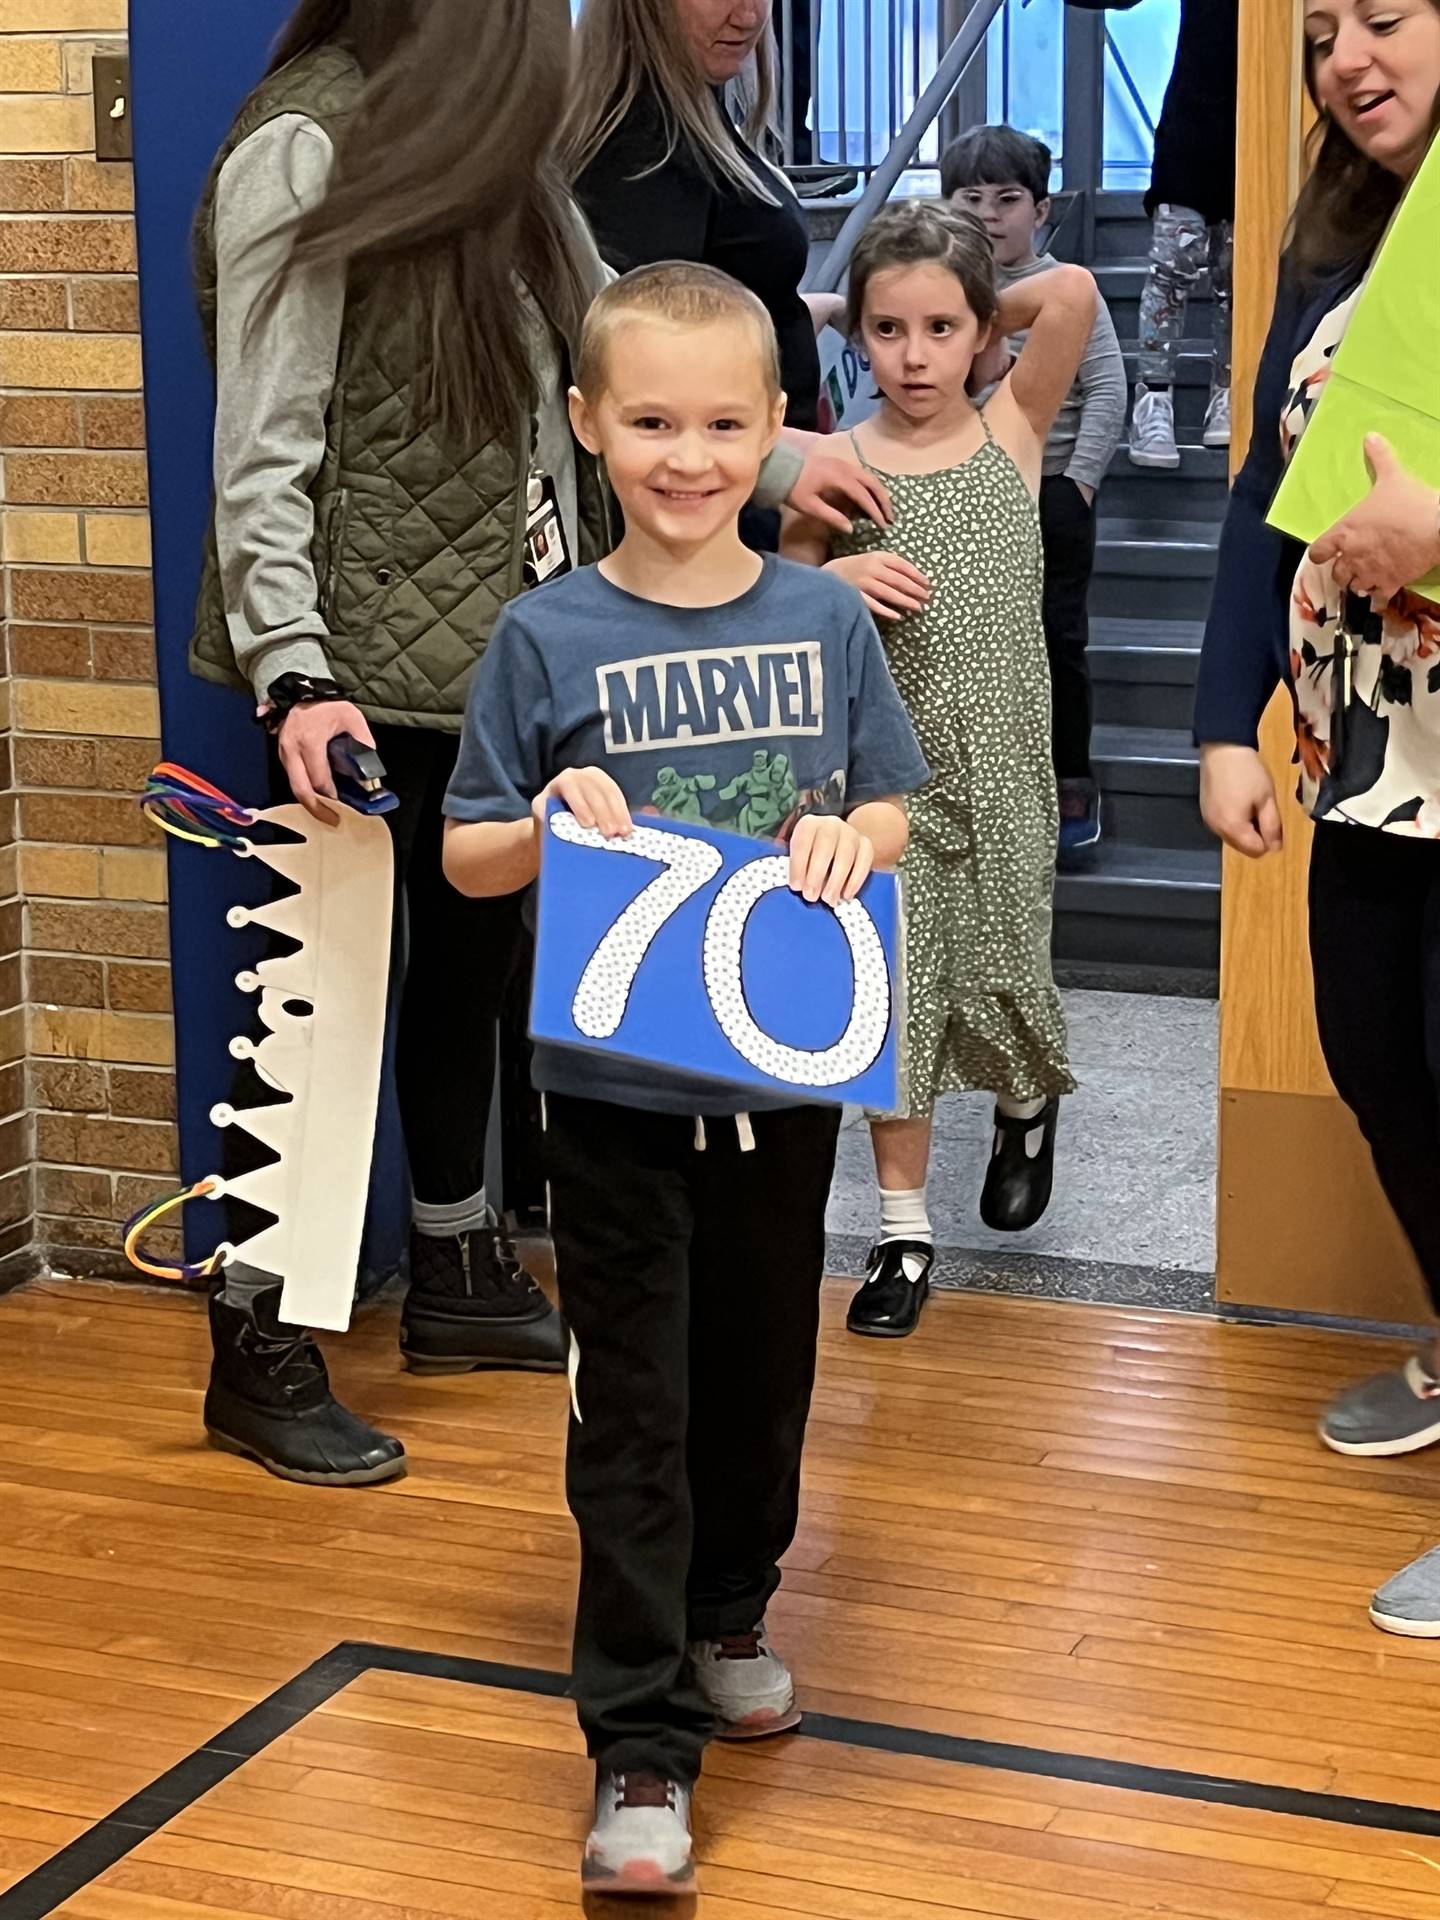 a student holding 70 sign